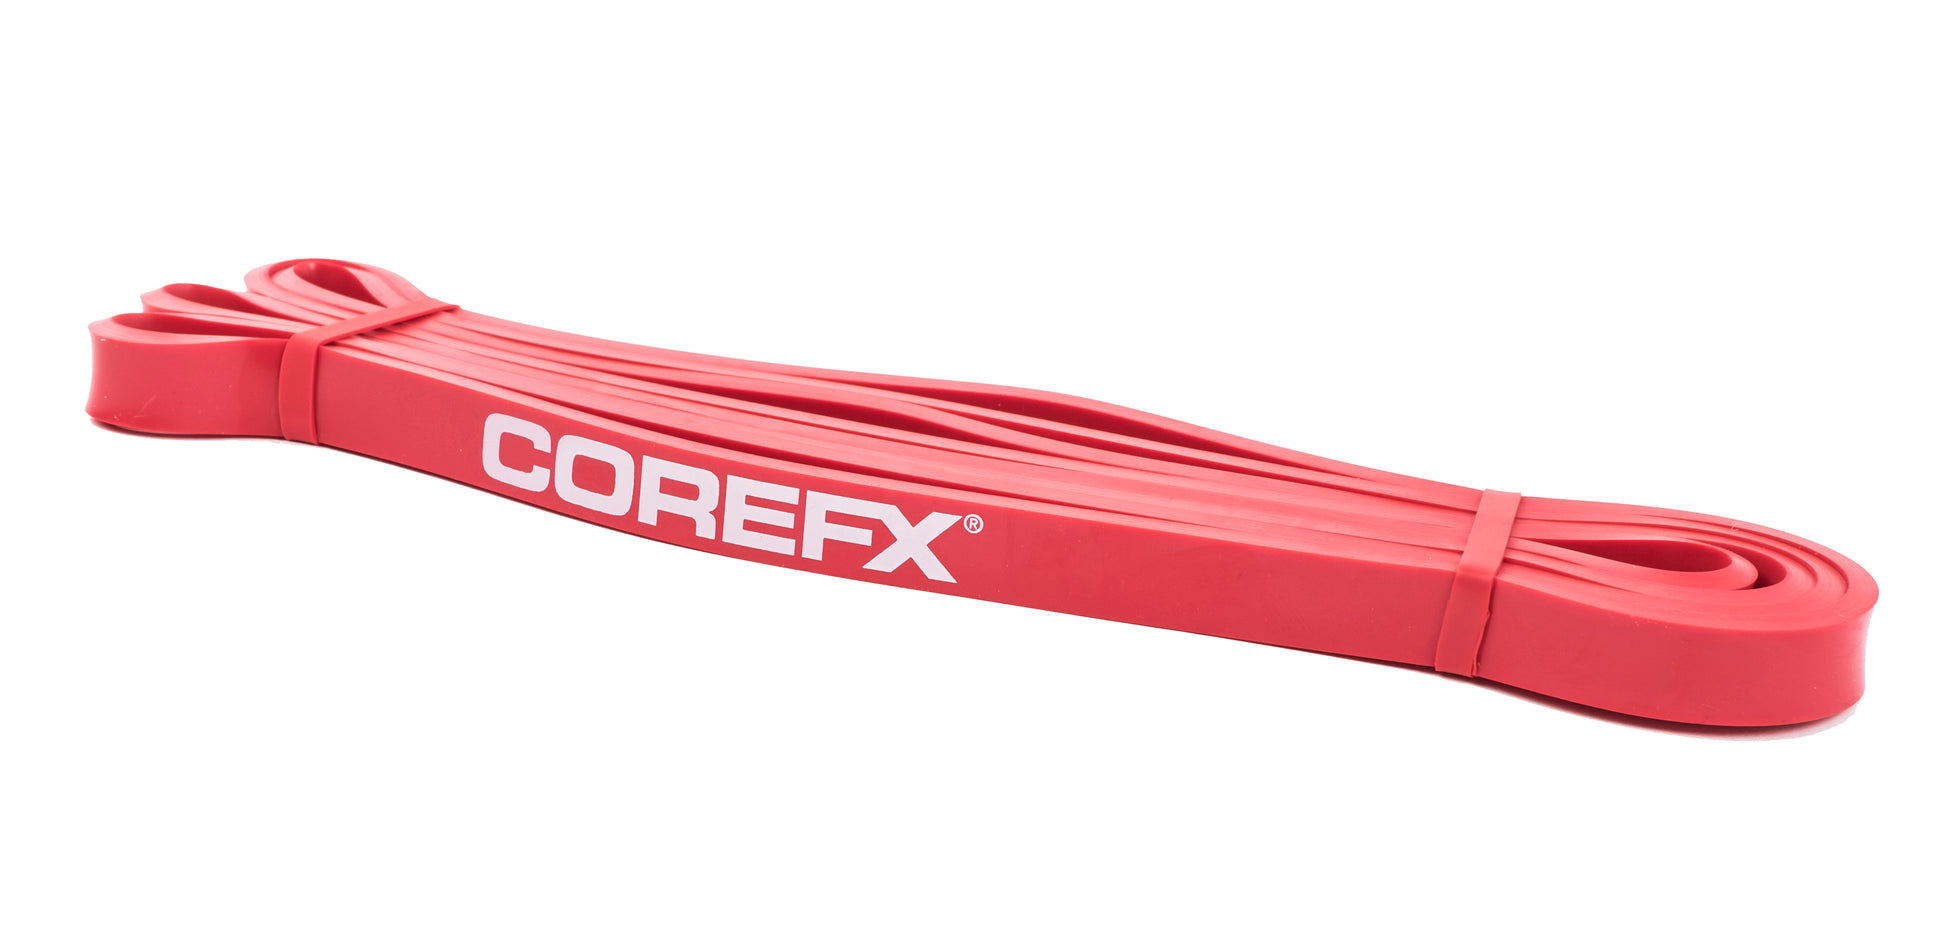 41 Average Flex Band – Total Strength and Speed